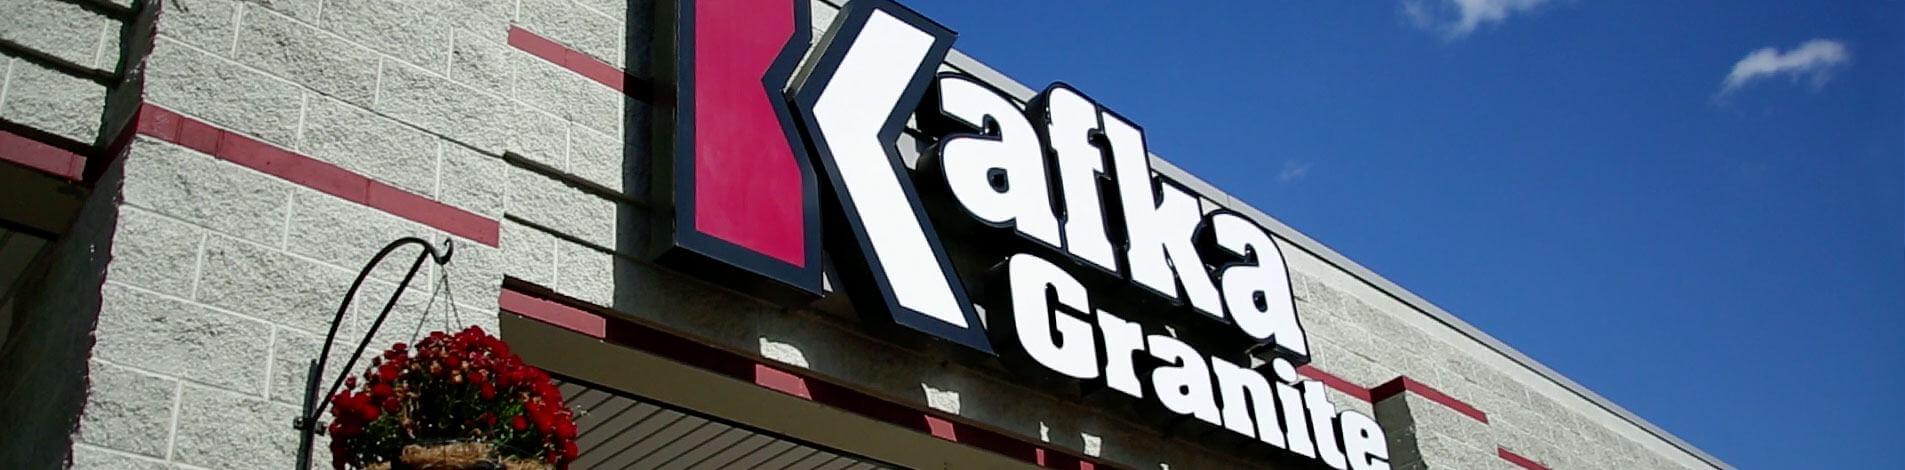 A sign featuring the logo of Kafka Granite hangs above the Kafka Granite office.